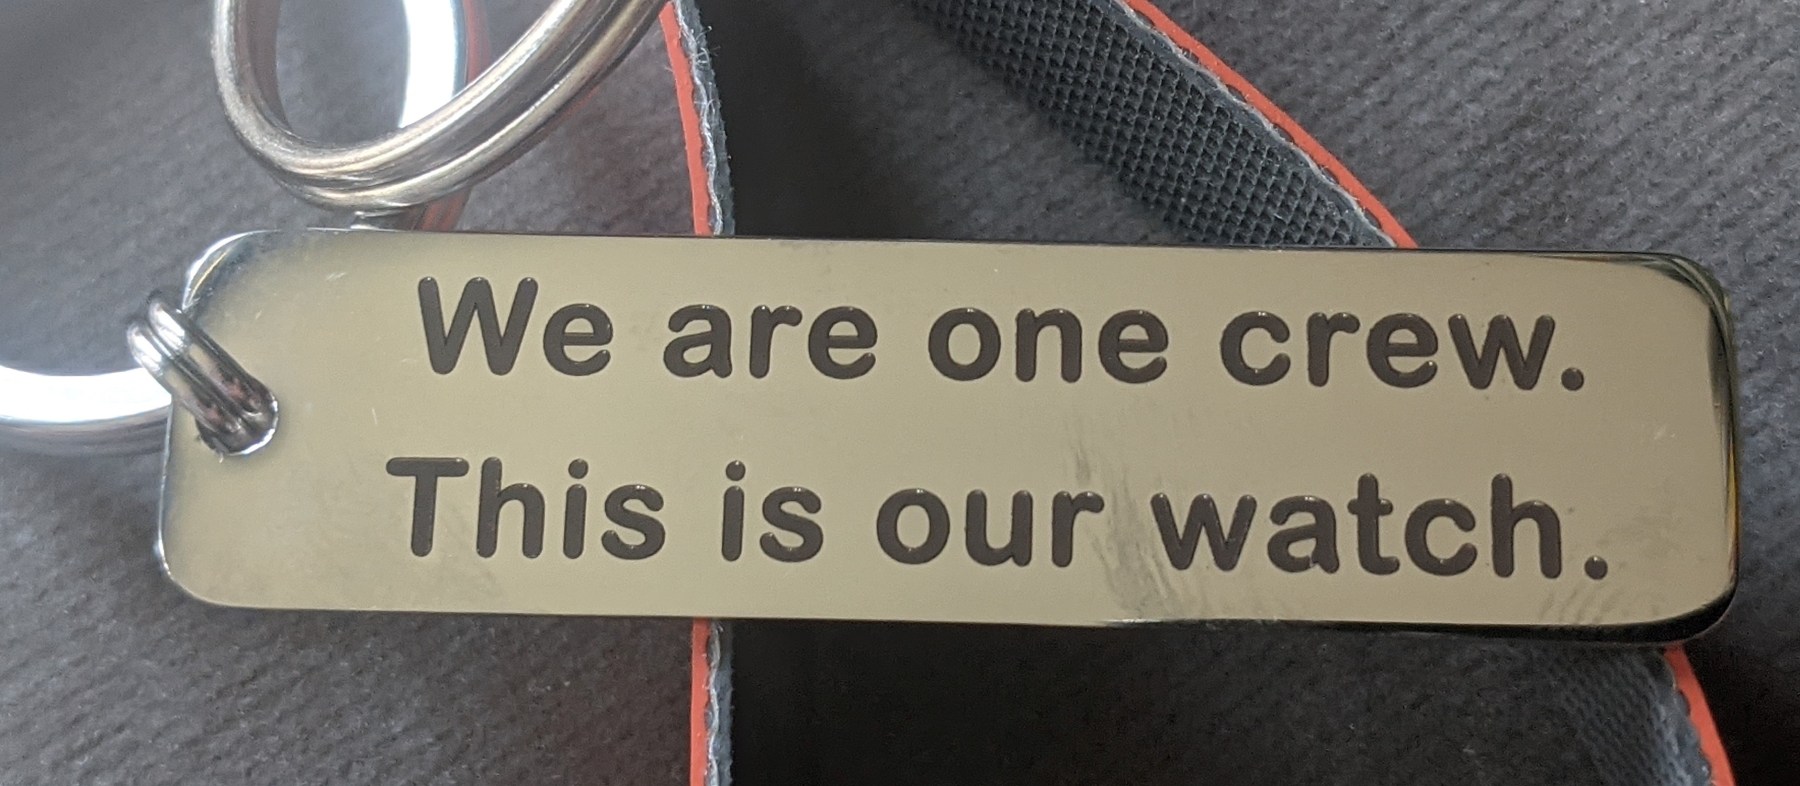 Key ring featuring stainless steel tag reading "We are one crew. This is our watch." and sling made from inshore lifeboat material cut-off.